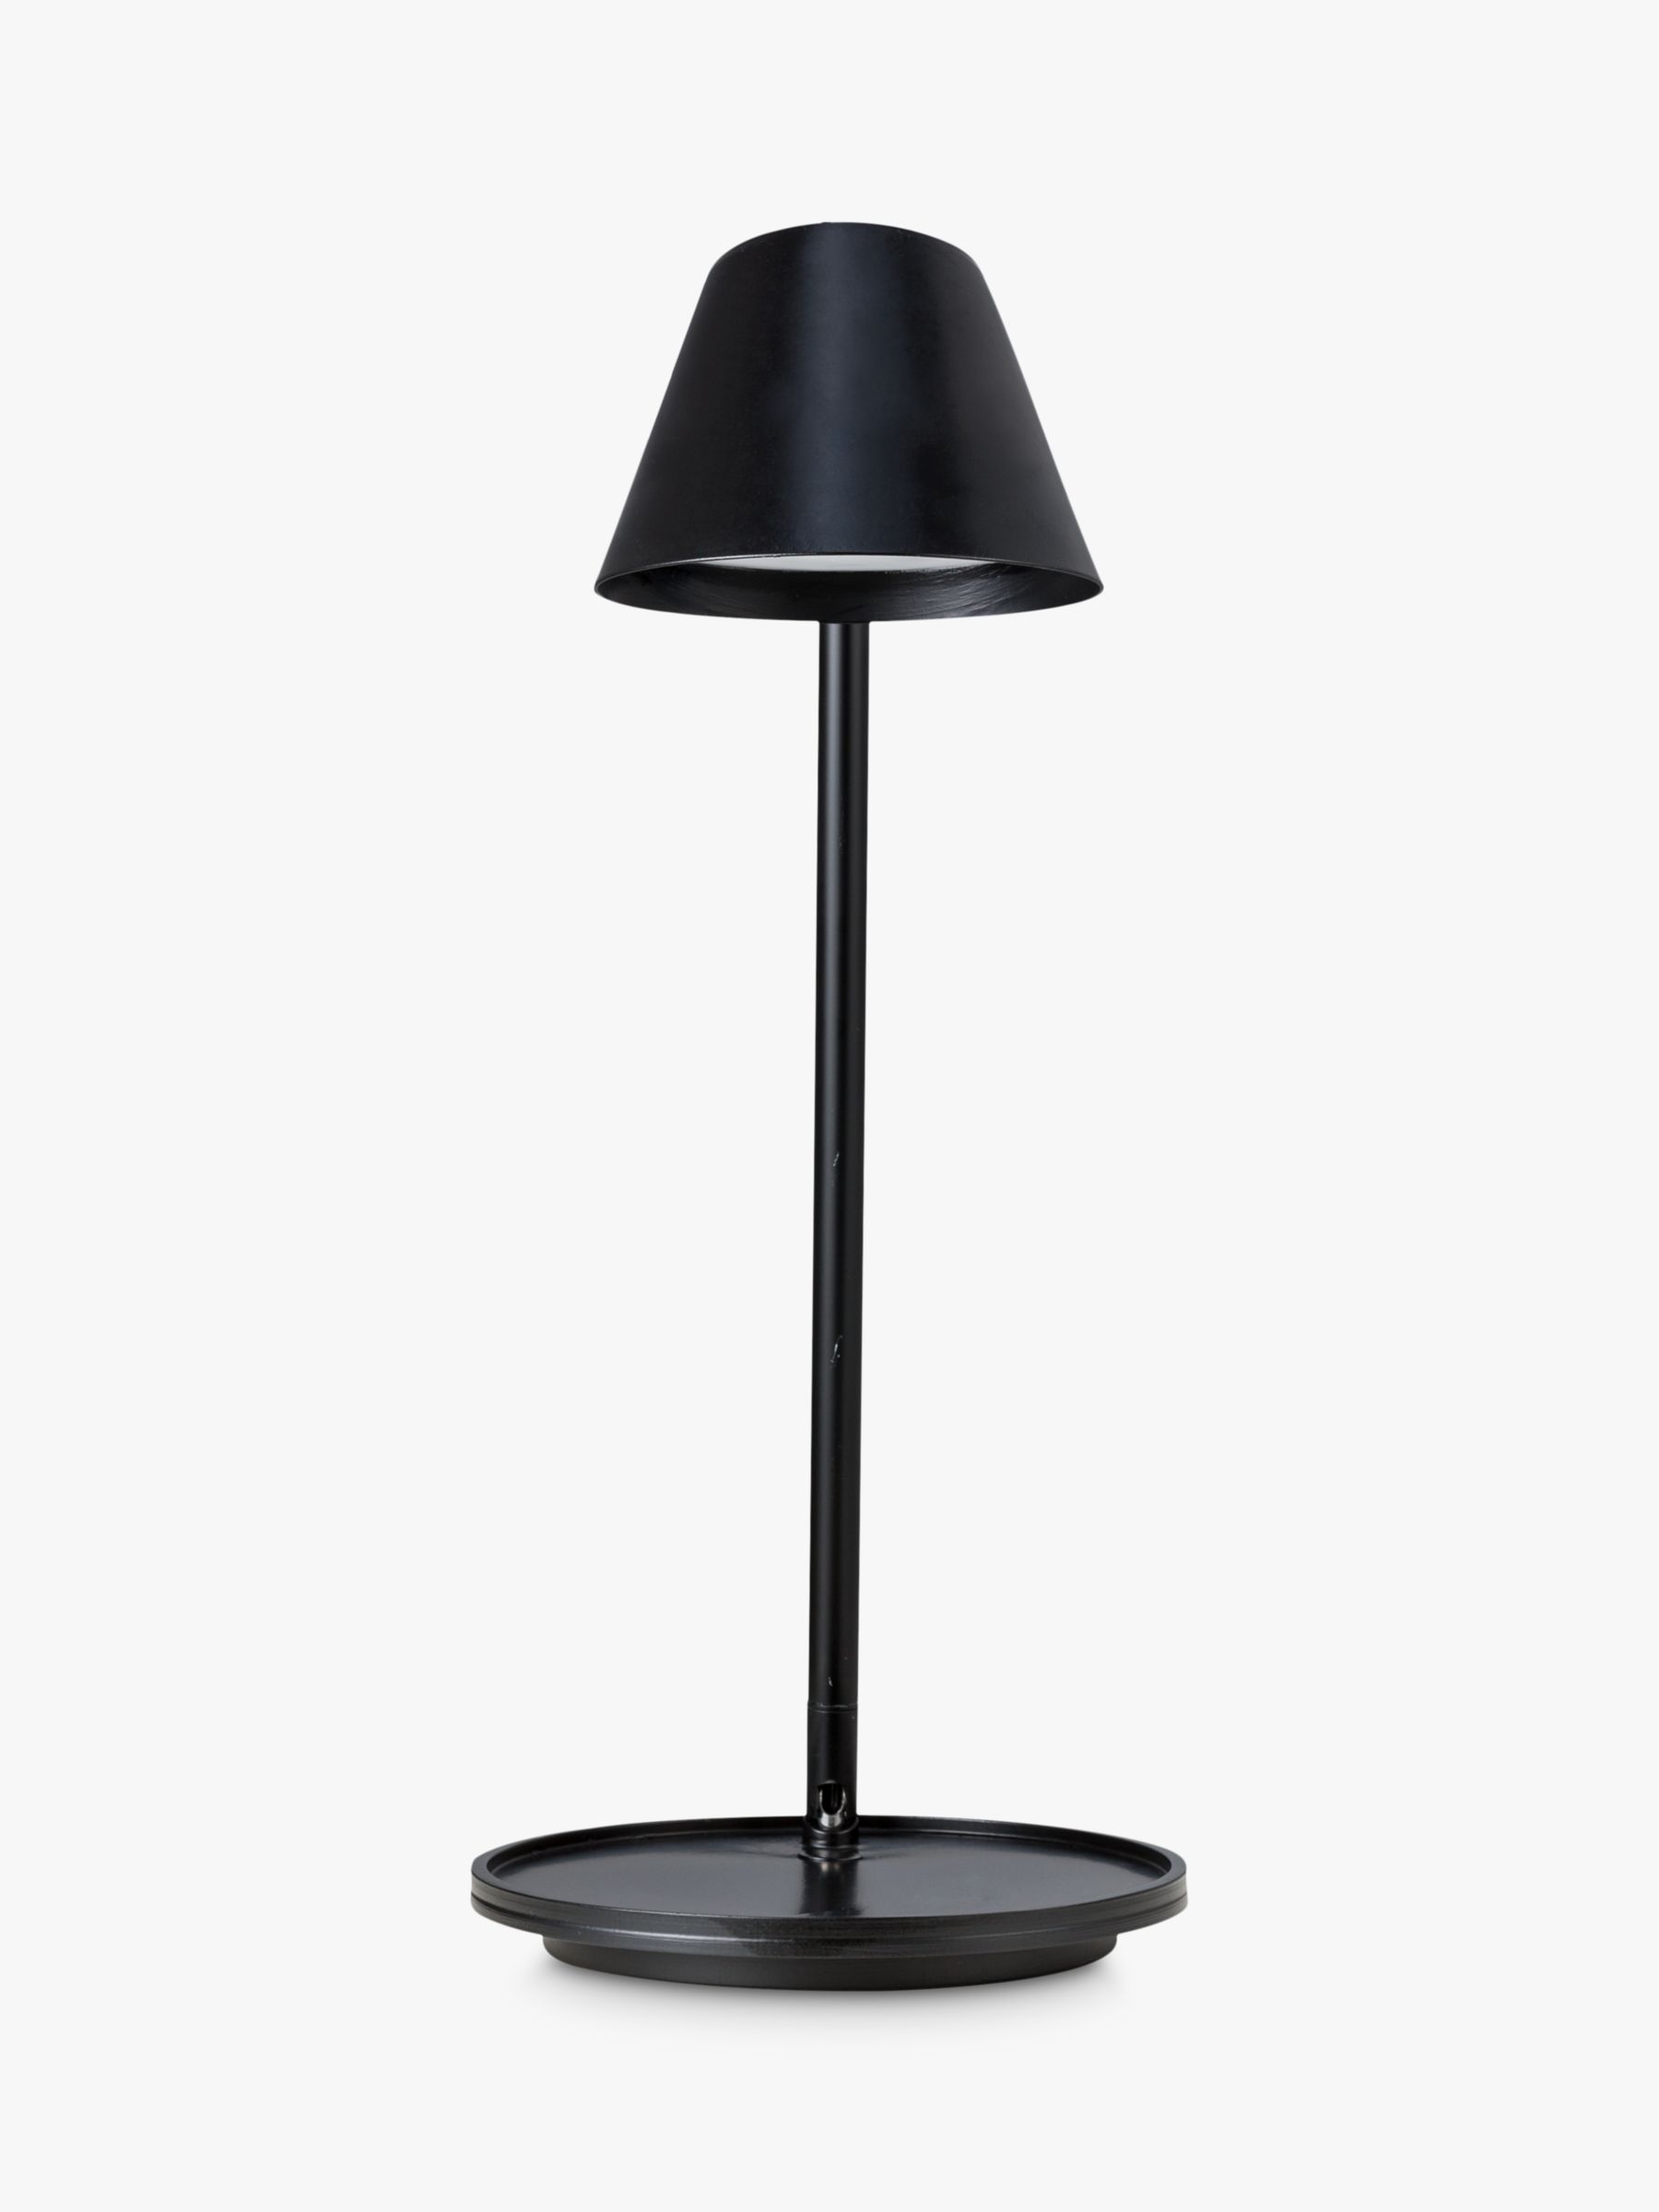 Photo of Nordlux design for the people stay led table lamp